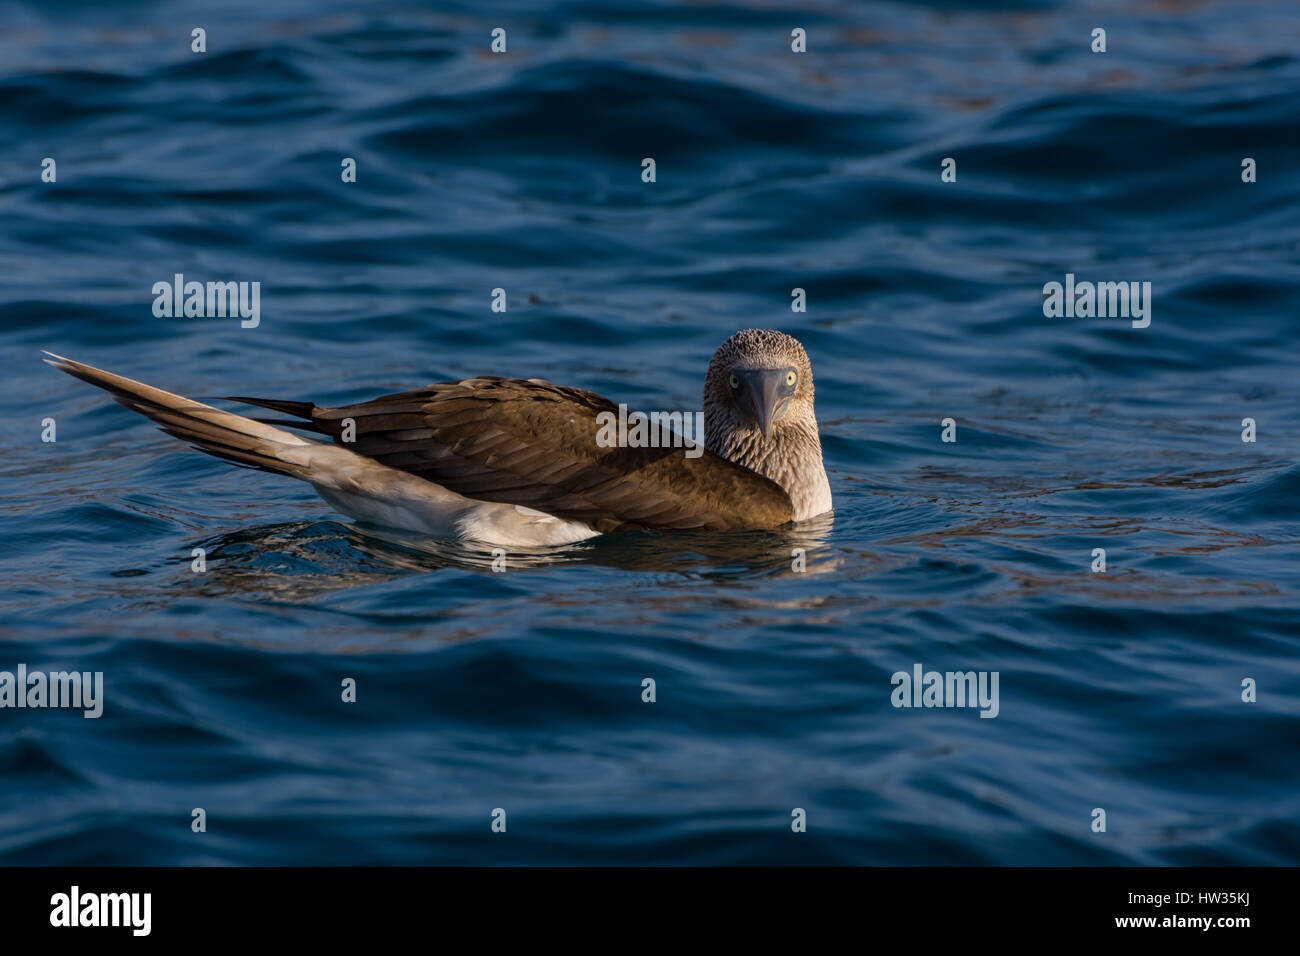 Adulto Blue Footed Booby (Sula nebouxii) nuoto in mare nelle isole Galapagos, Ecuador. Foto Stock